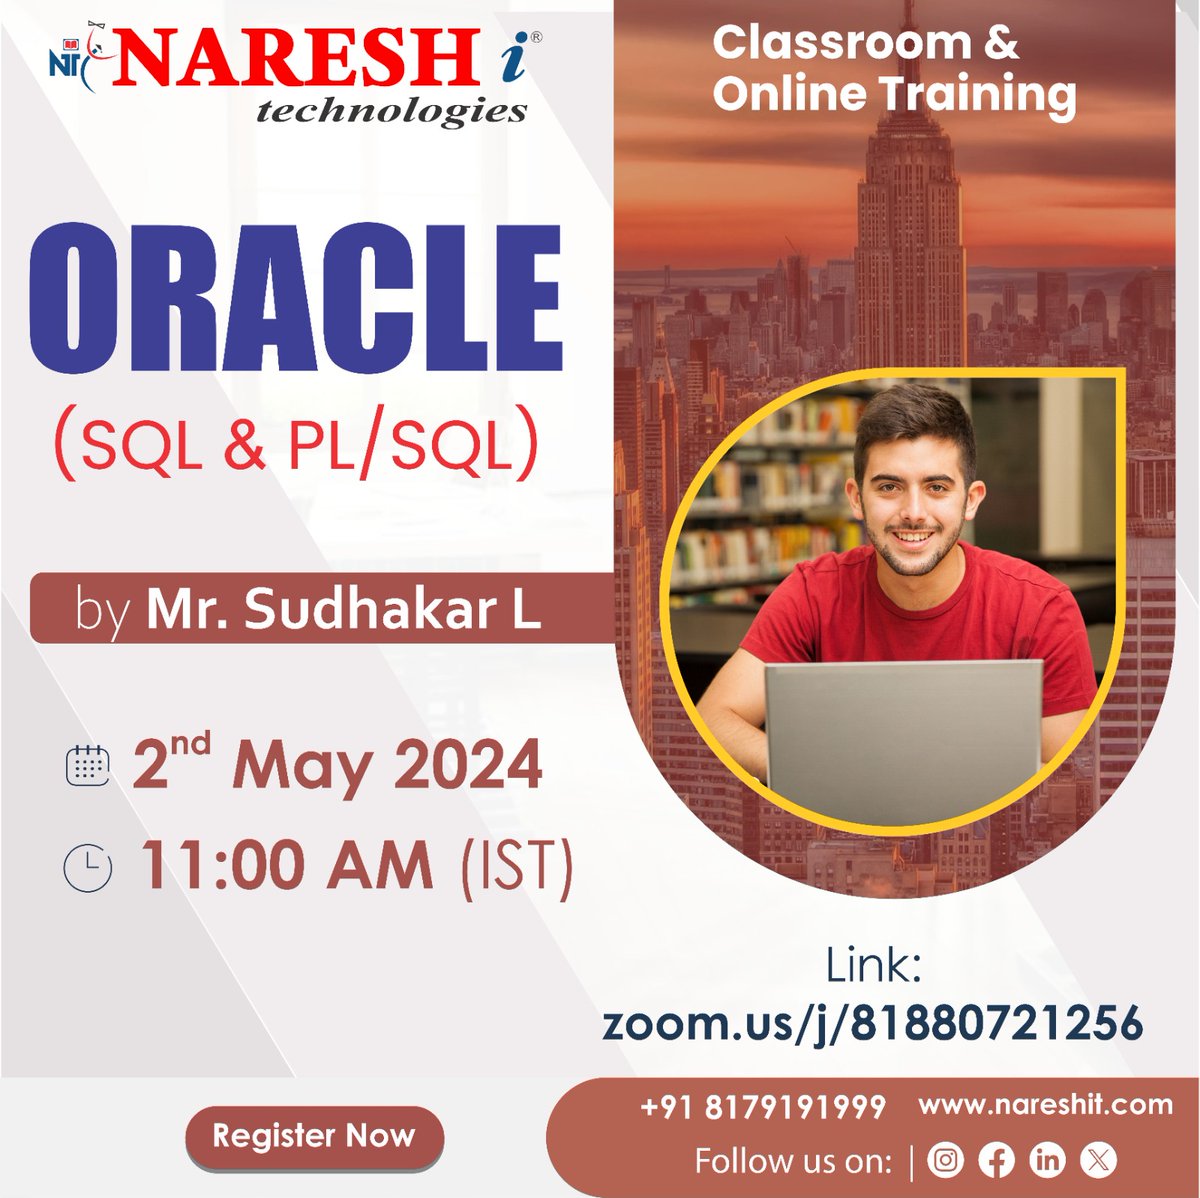 🛑Free Demo for One Week🛑
✍️Enroll Now: bit.ly/3JFh5LT
👉Attend a Free Demo On Oracle [SQL/PL & SQL] by Mr. Sudhakar.L
📅Demo on: 2nd May @ 11:00 AM (IST).

#Oracle #sql #plsql #Course #Database #datascience #education #software #programming #nareshit #learnfromhome